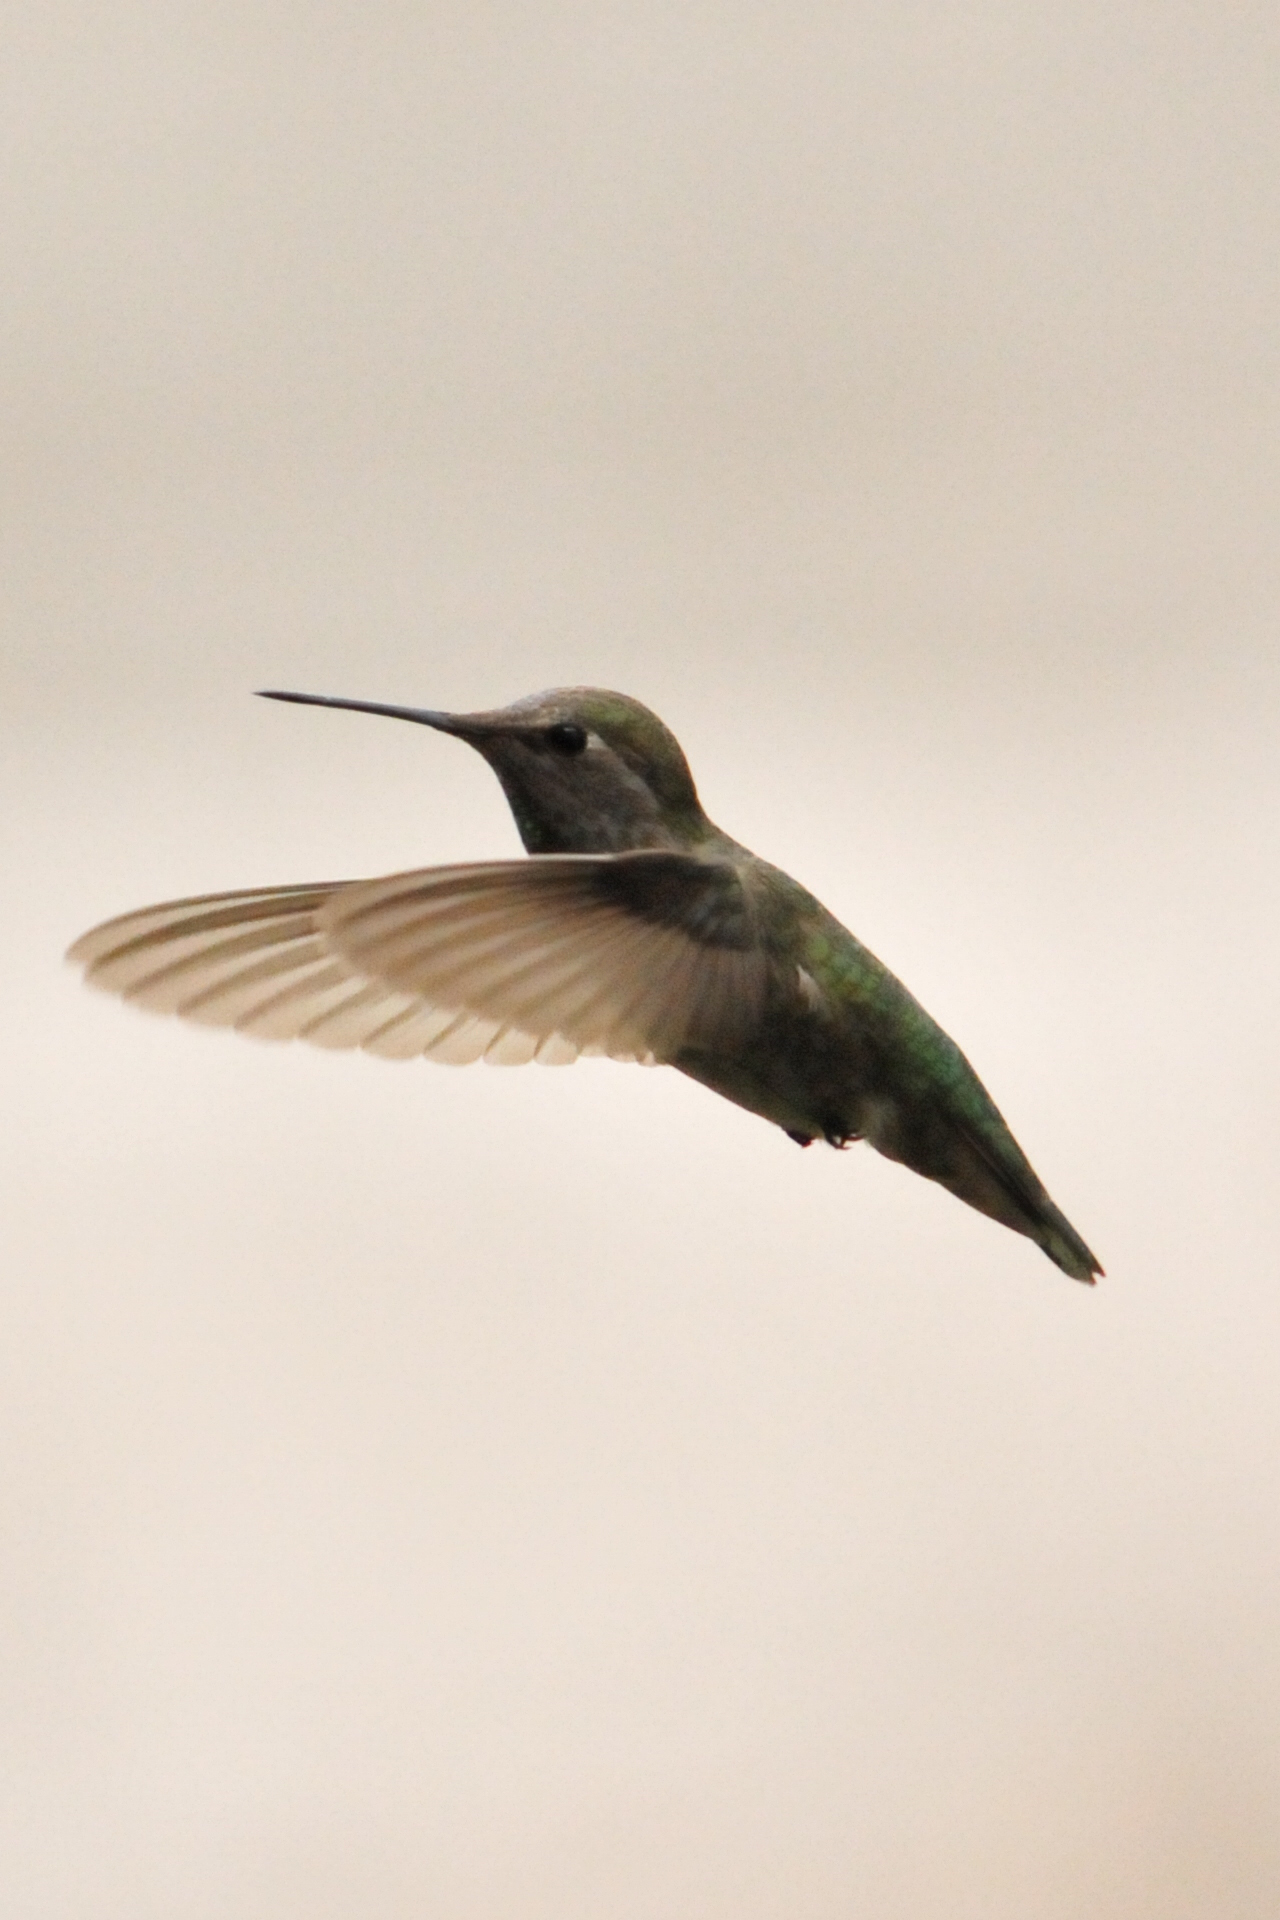 a humming bird flying in the air with its wings spread